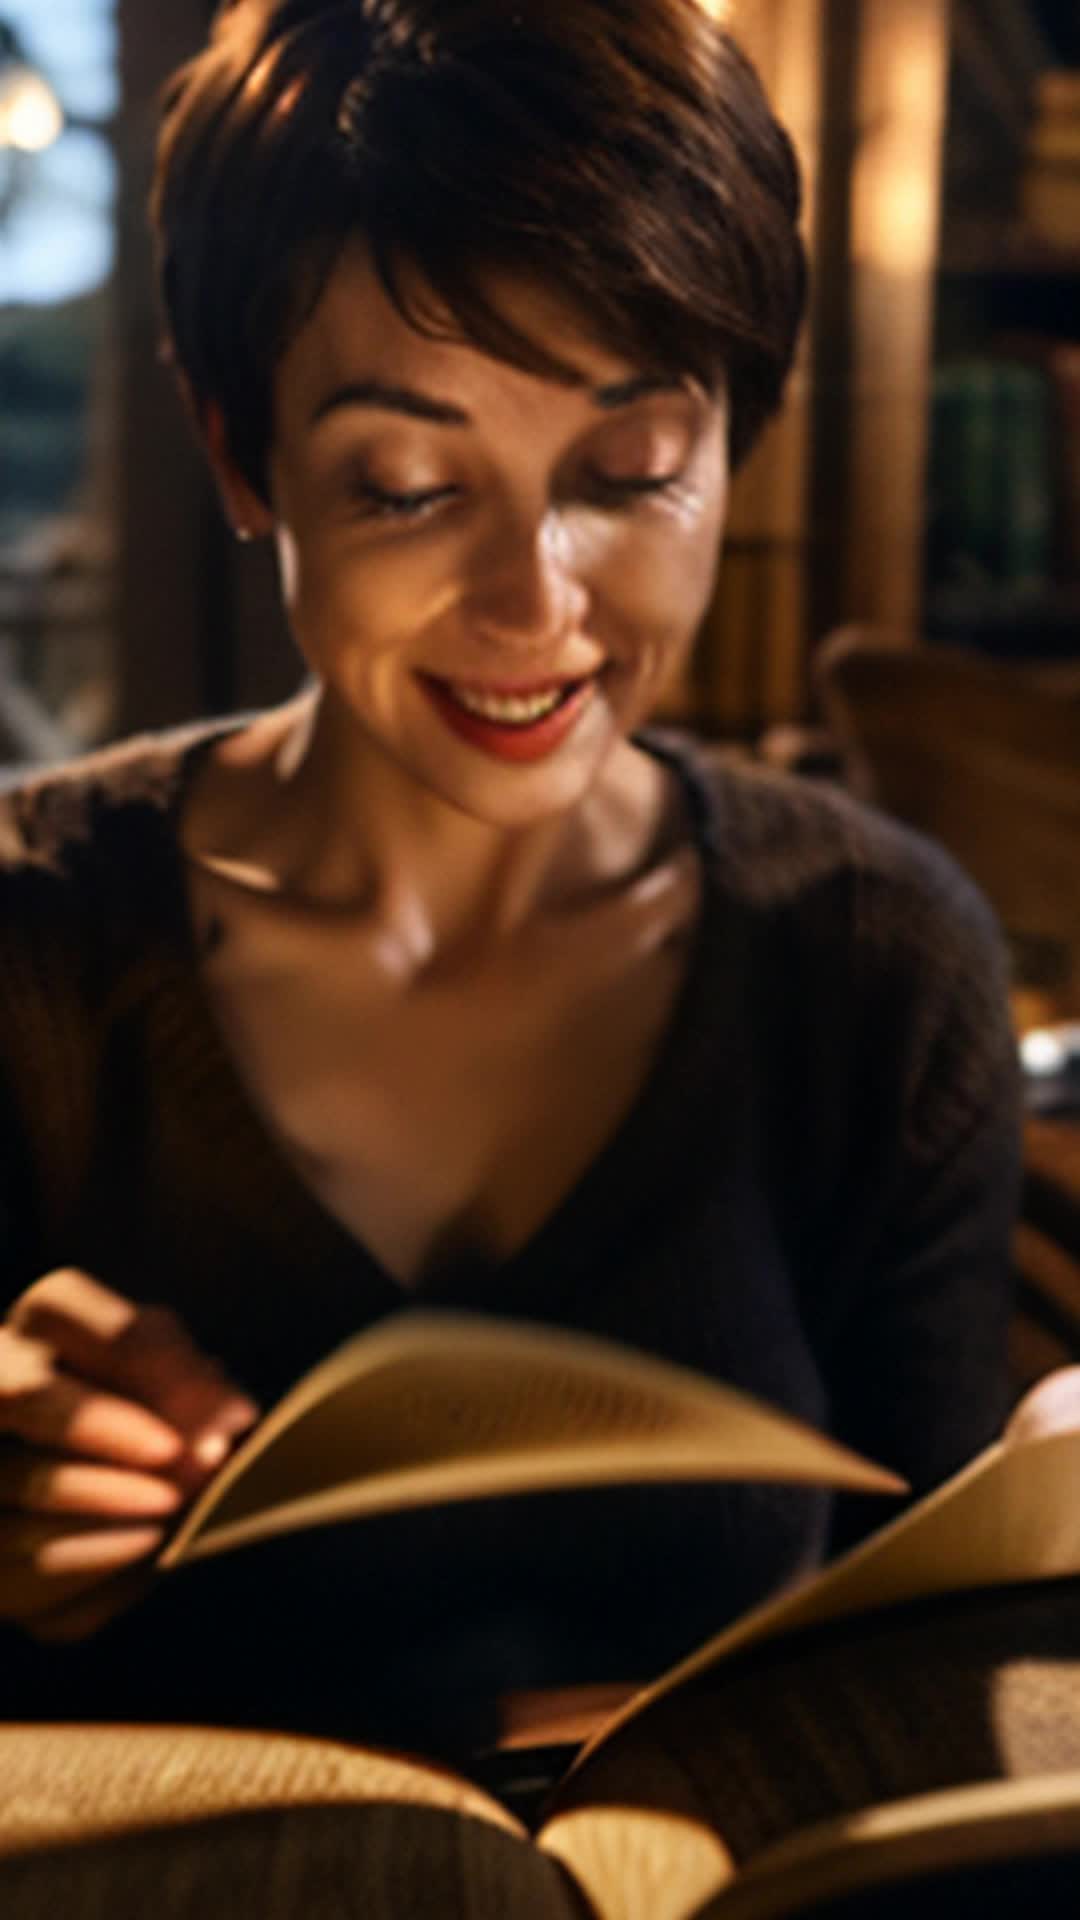 Brunette pixie-cut mom, eagerly flipping through Harry Potter pages, voice alive with excitement, vibrant, enthusiastic storytelling, bright indoor lighting, cozy evening setting